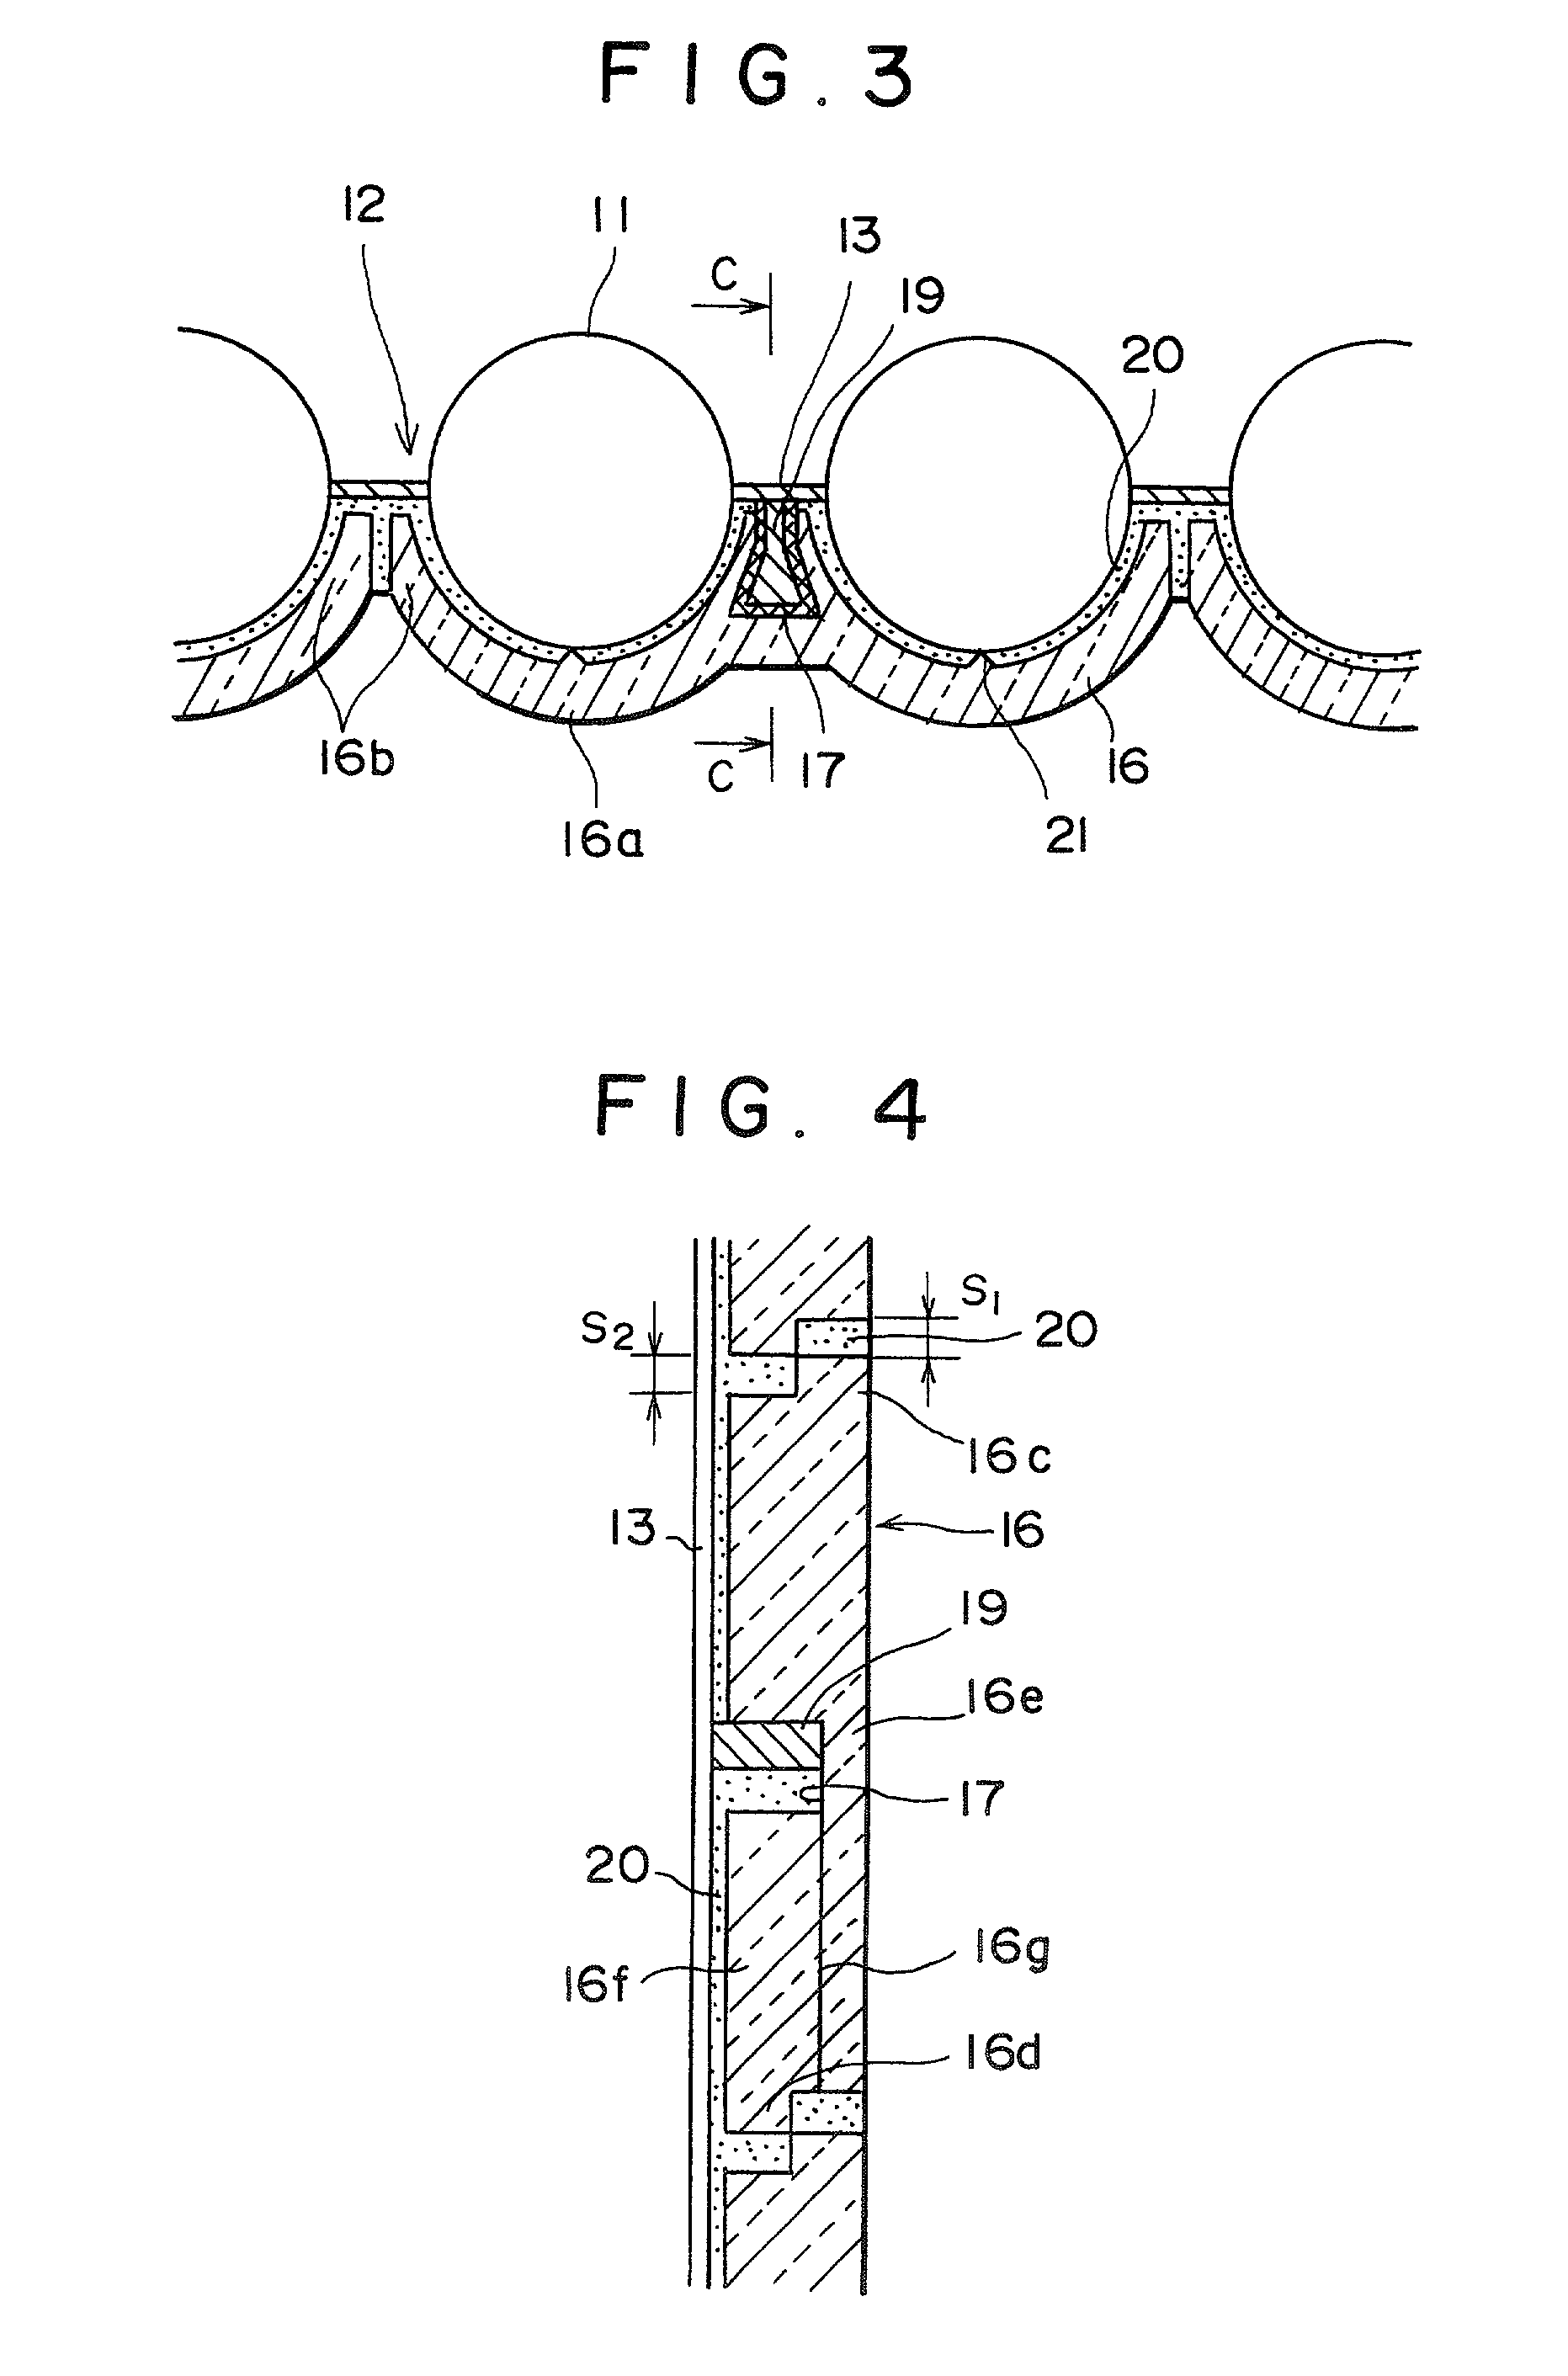 Heat-resistant assembly for protecting boiler tubes and method of assembling same